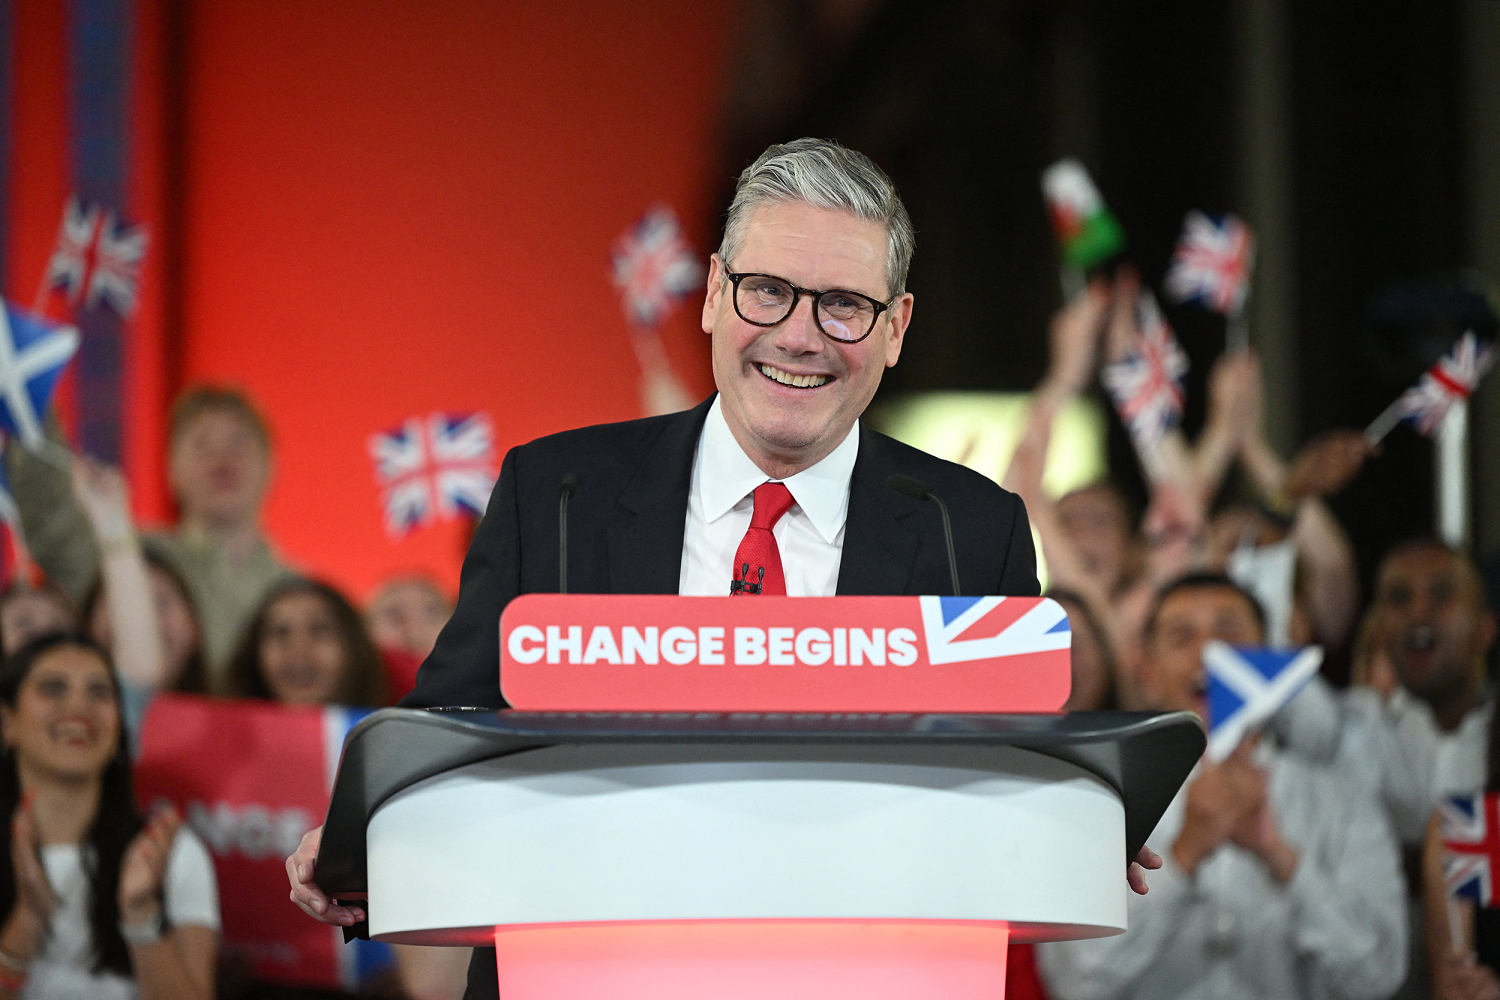 Britain wakes up to new government as Labour Party wins election in a landslide